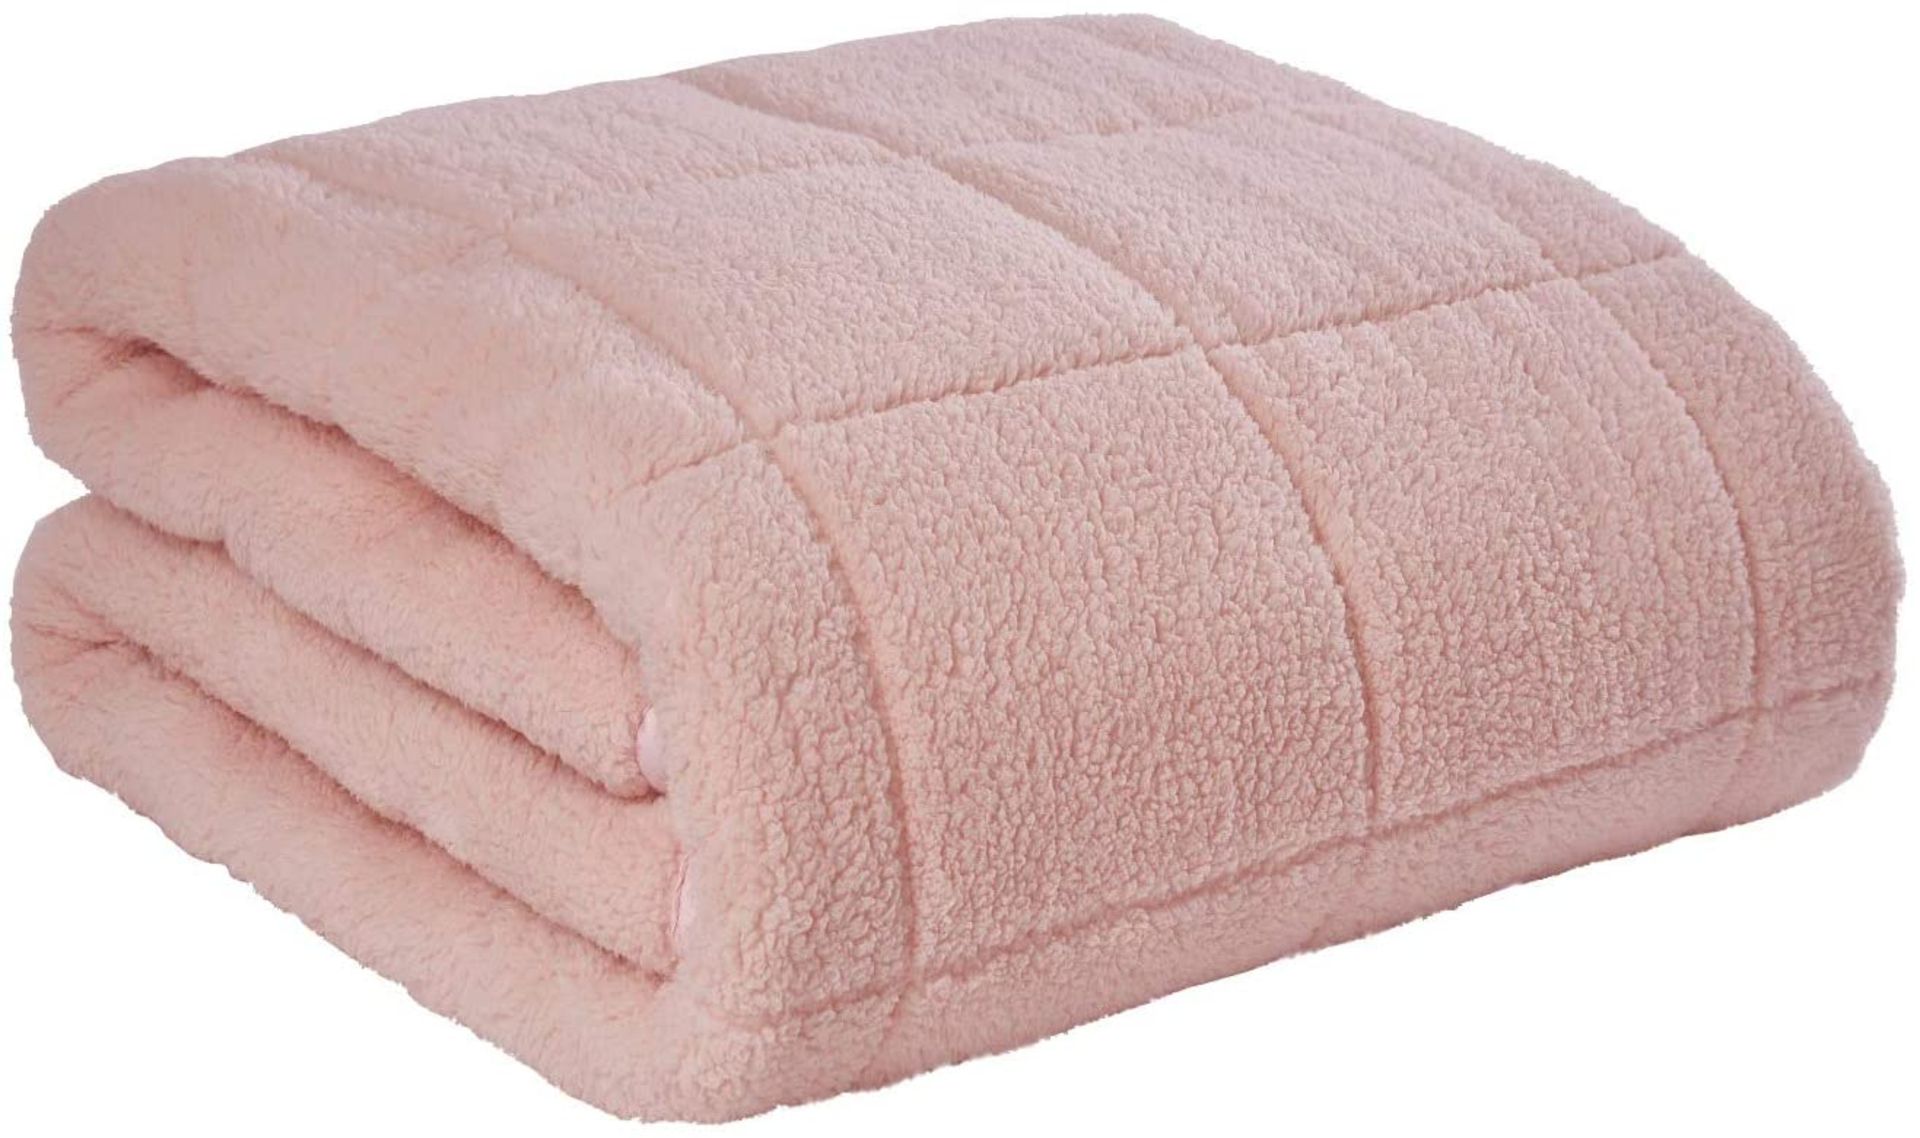 RRP -£45.12 Sleepdown Weighted Blanket 8kg Soft Teddy Fleece Therapy Sensory - Image 2 of 2